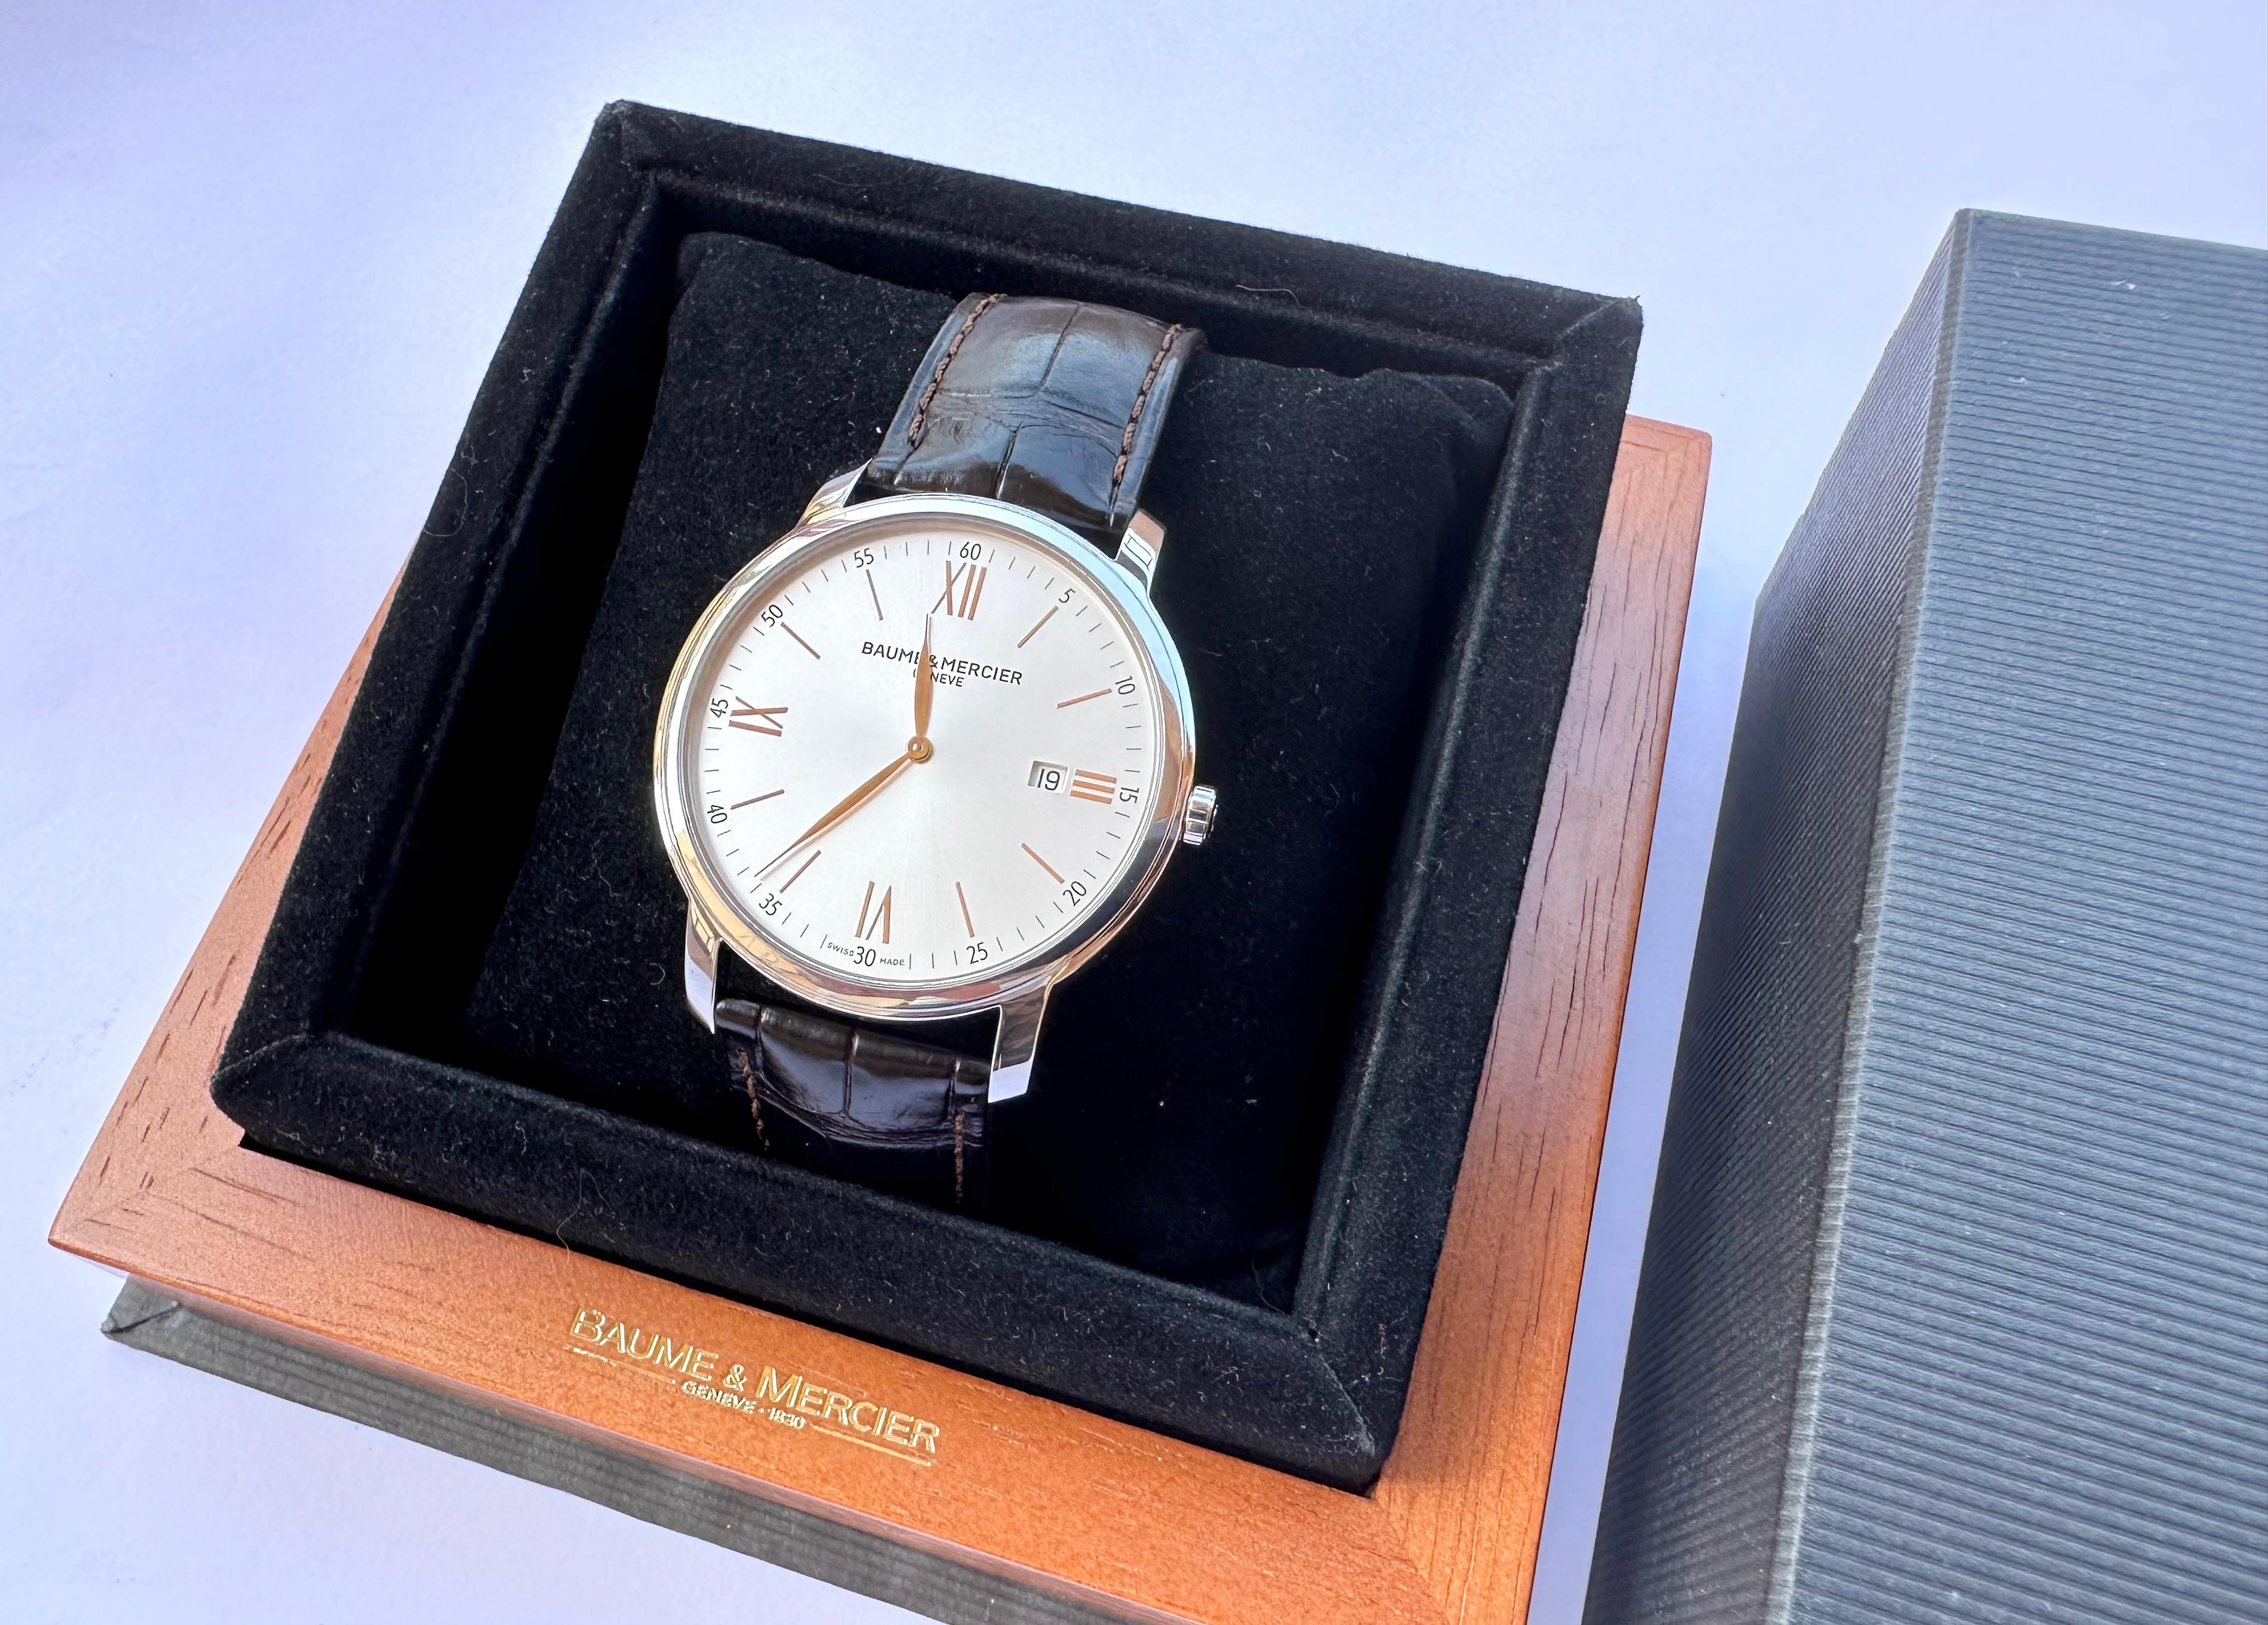 Brand: Baume & Mercier

Model: Classima

Reference Number: 65493

Country Of Manufacture: Switzerland

Movement: Quartz

Case Material: Stainless steel

Measurements : Case width: 42 mm (without crown)

Band Type : Baume & Mercier Leather

Band